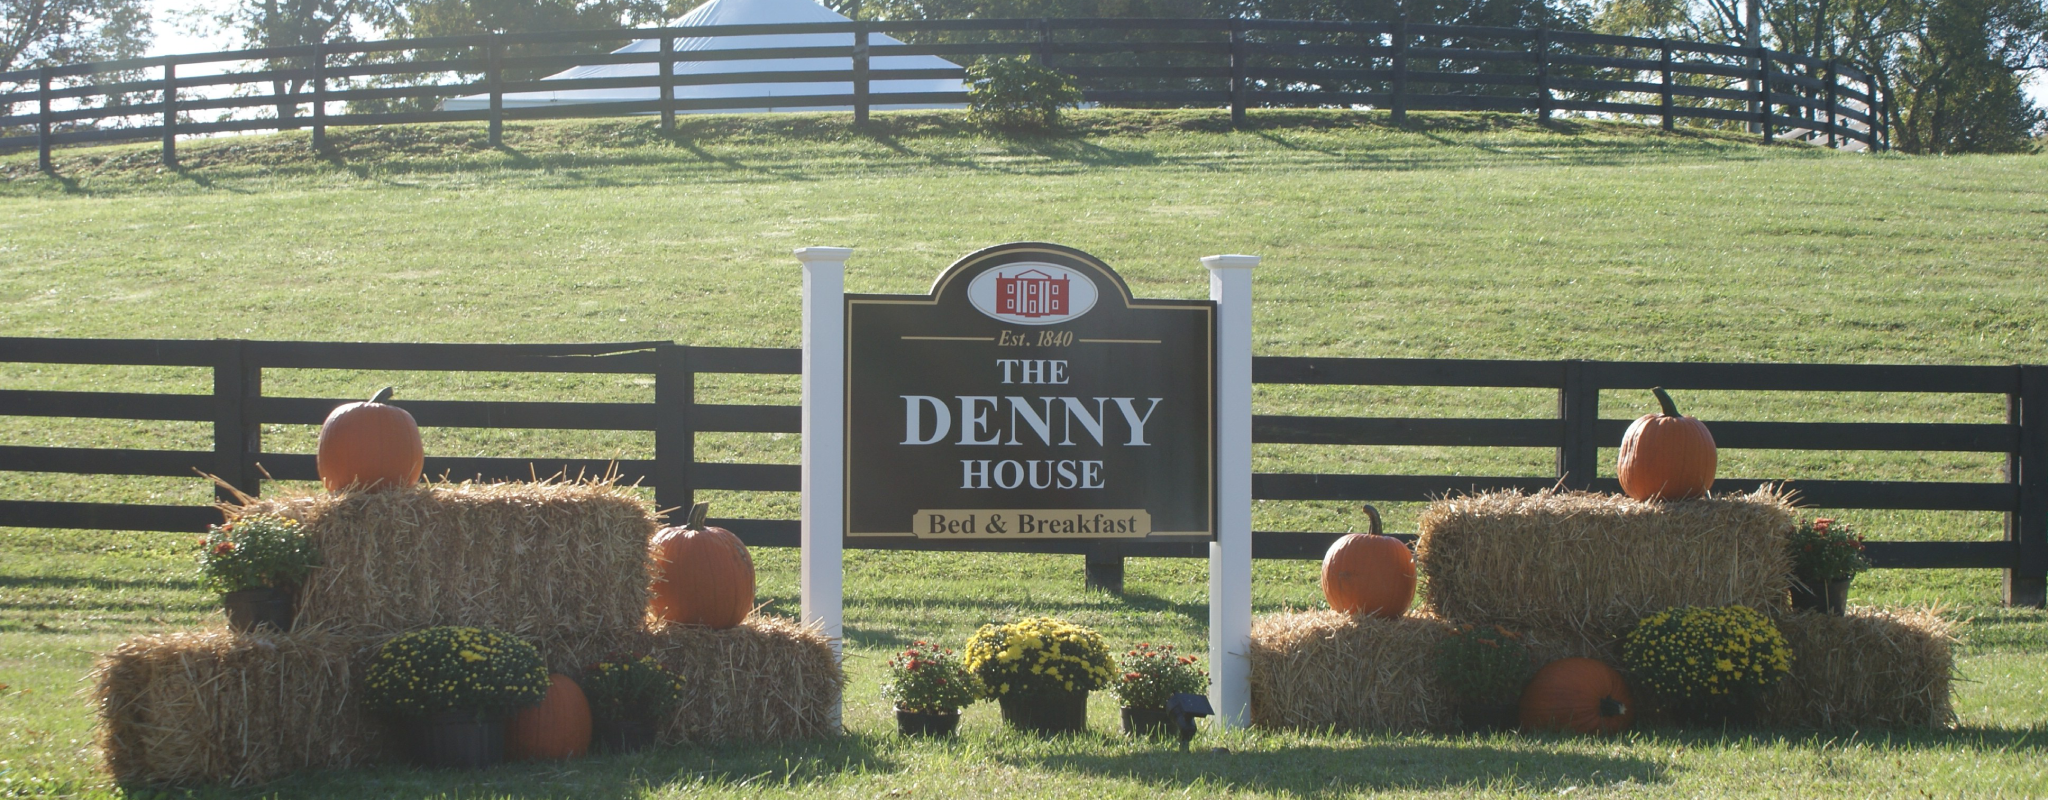 The Denny House sign by the road